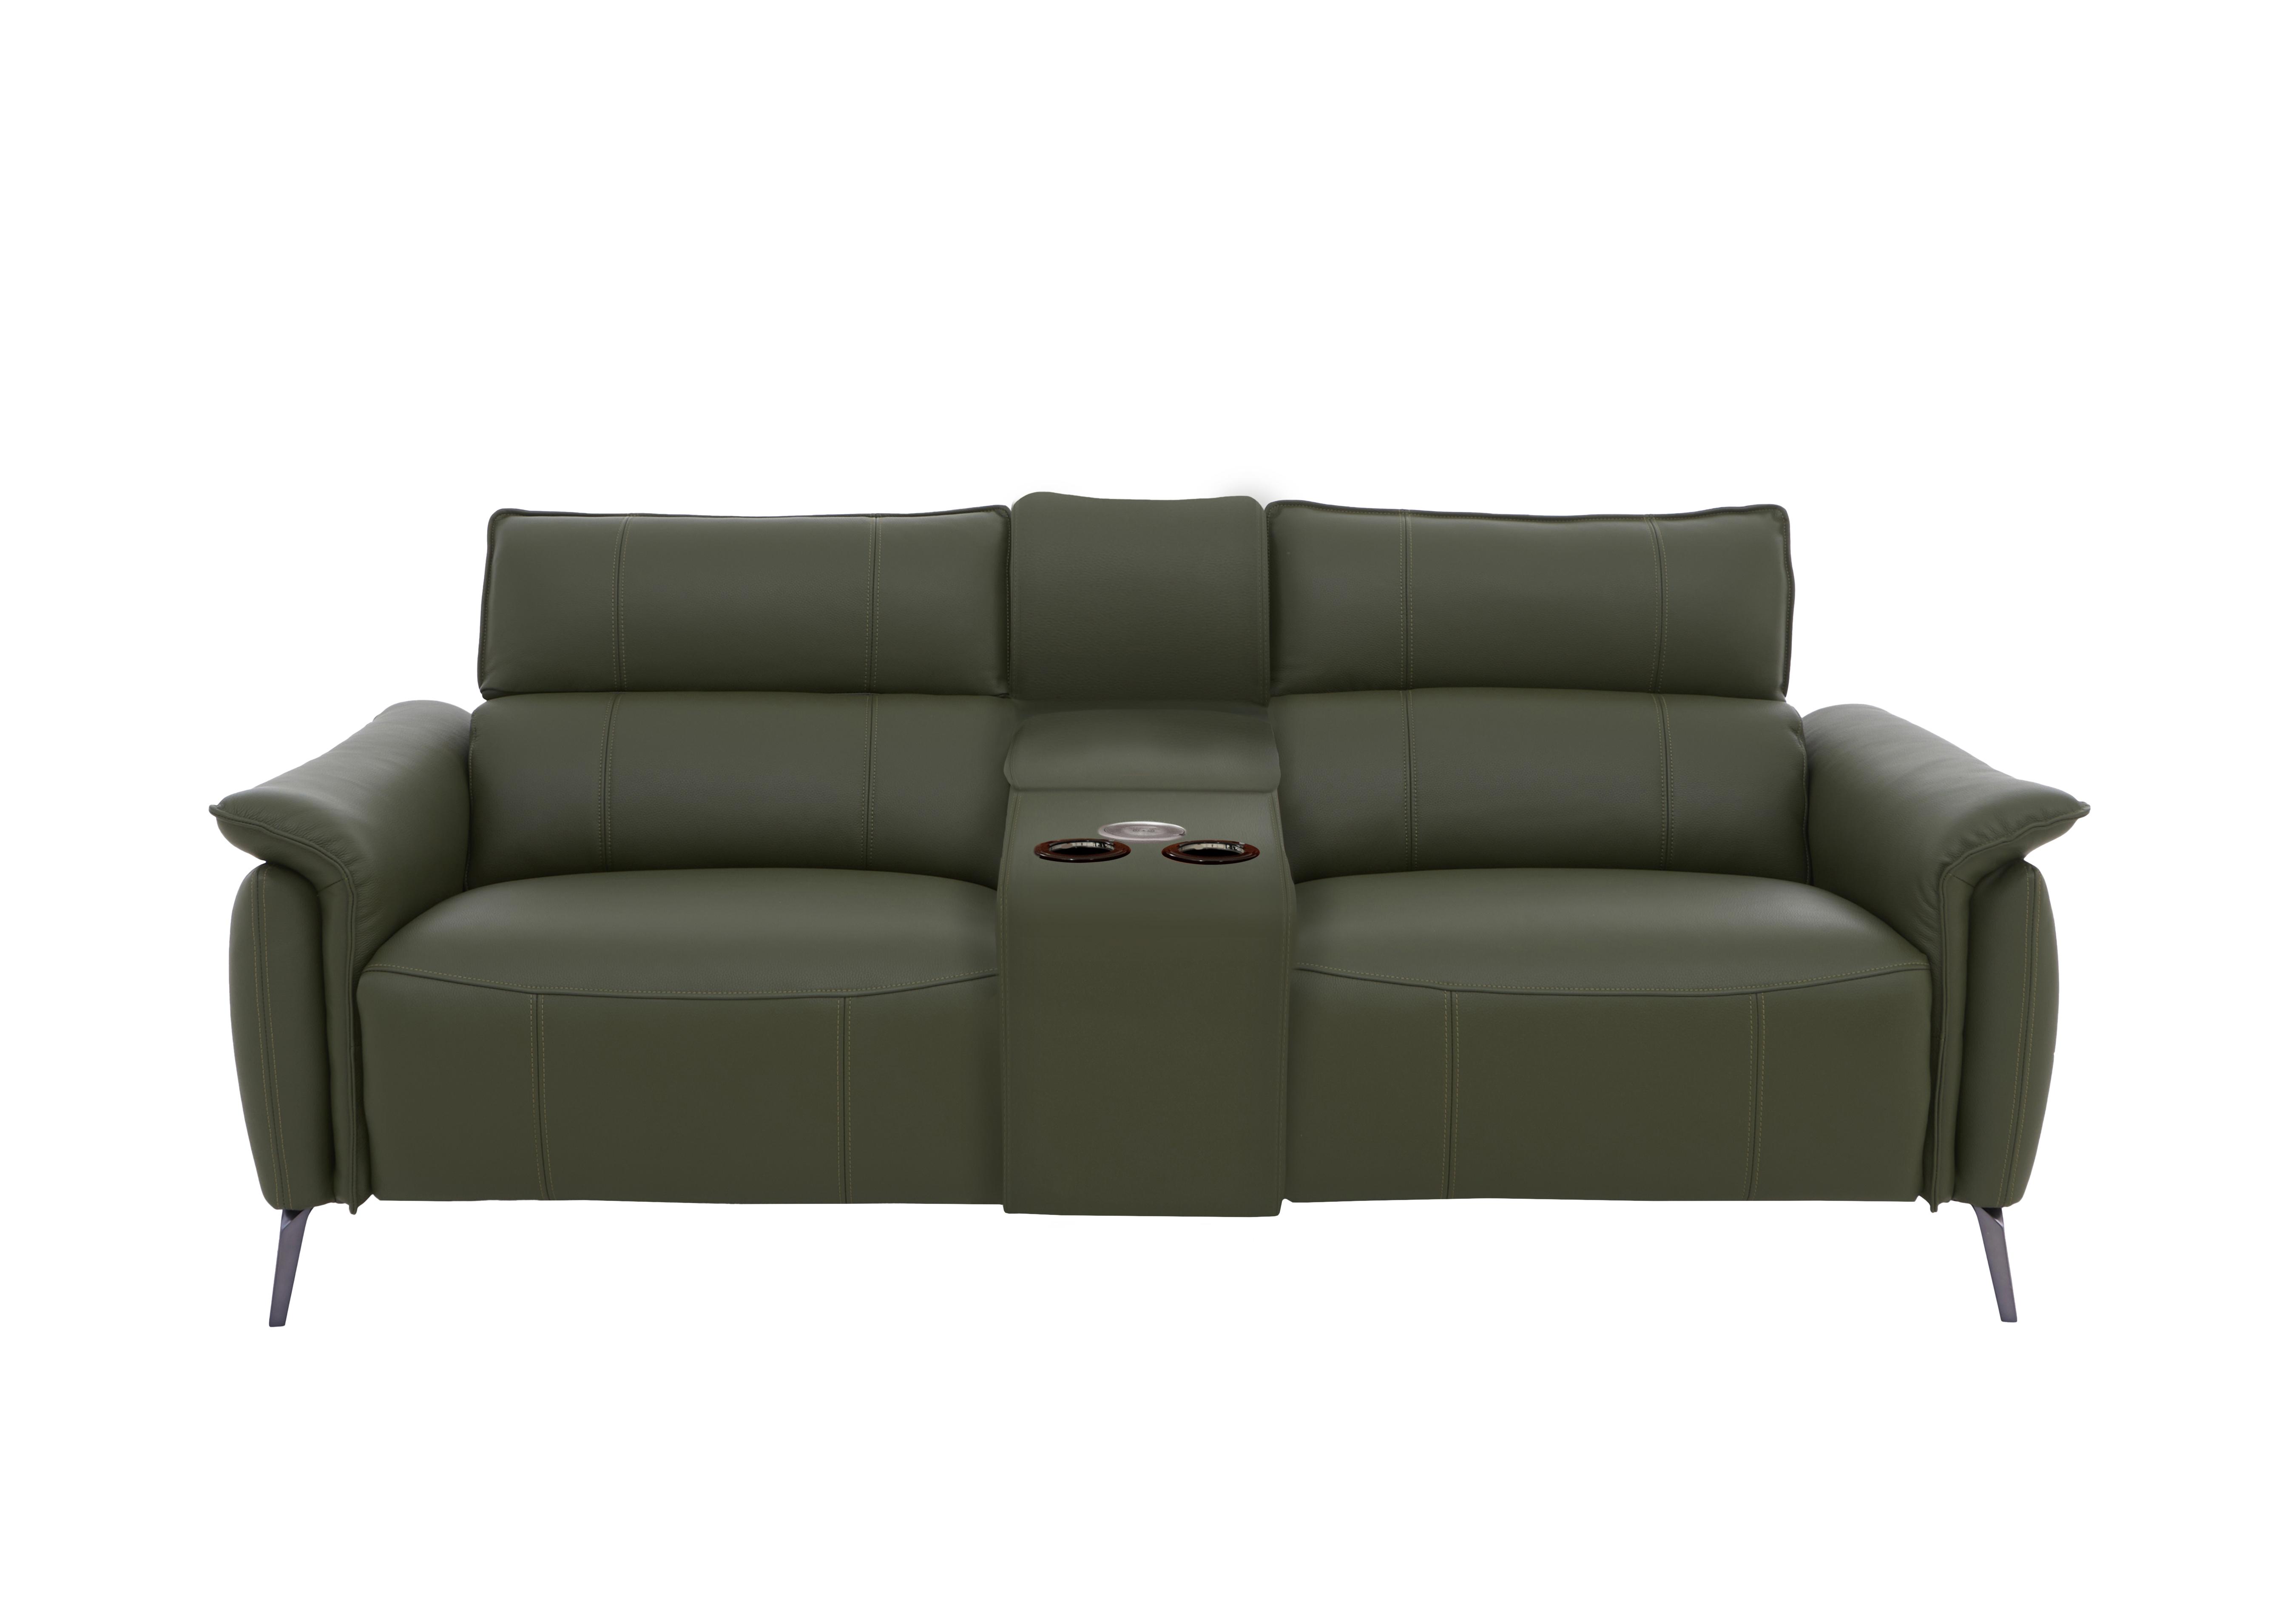 Jude 3 Seater Leather Power Recliner Sofa with Smart Console Unit and Power Telescopic Headrests in Montana Oslo Pine Cat-40/10 on Furniture Village